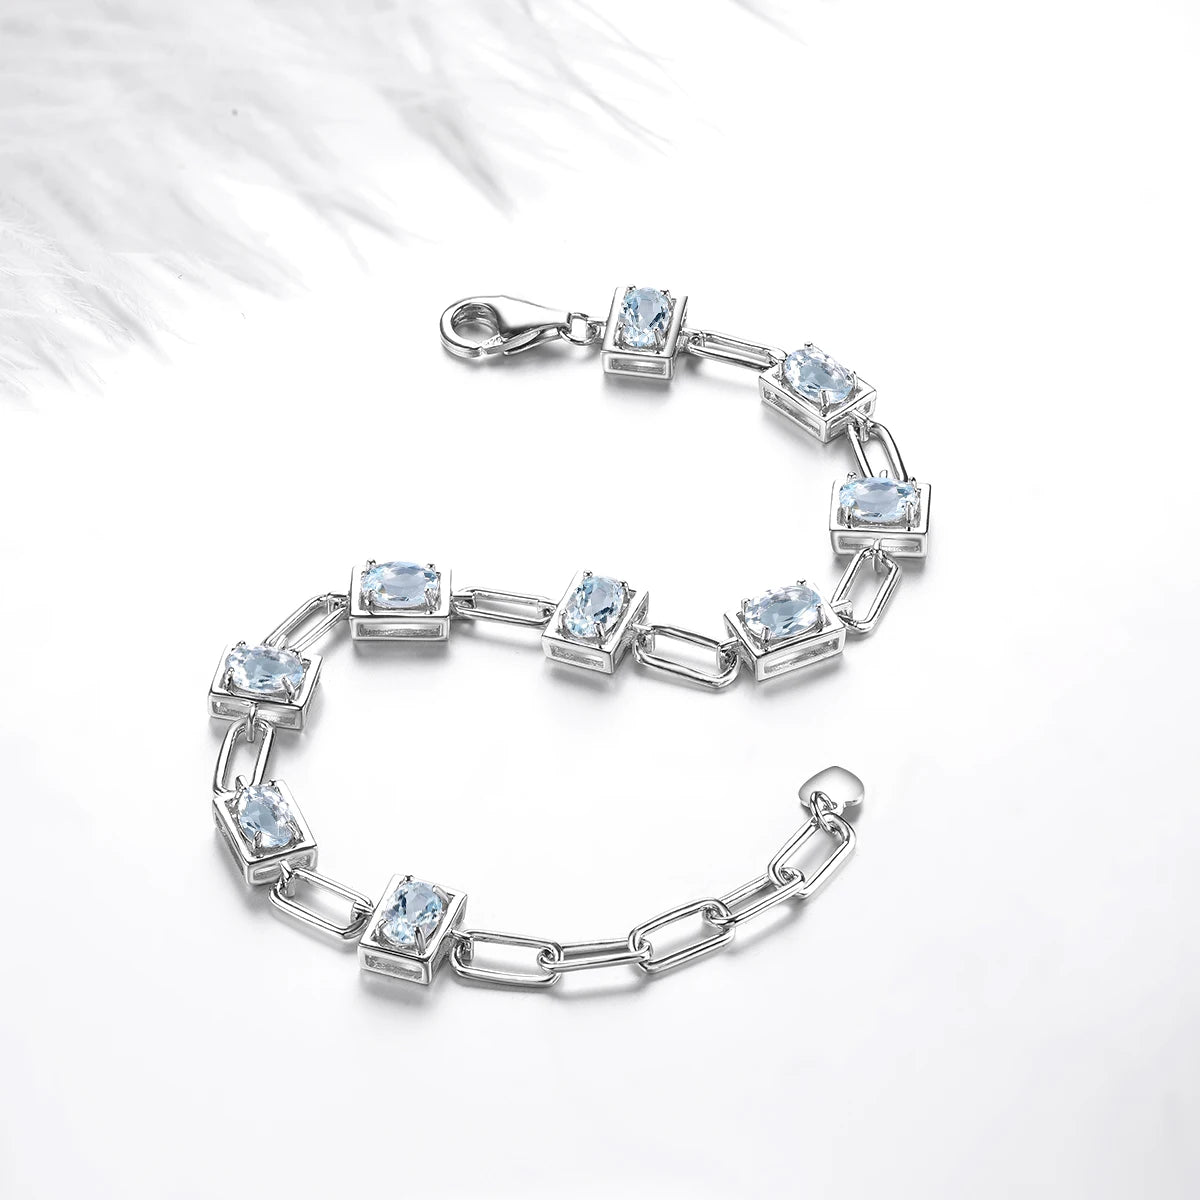 Genuine Aquamarine Solid Silver Bracelet S925 Natural Light Blue Gemstone 3.6 Carats Unique Special Style Women Birthday Gift